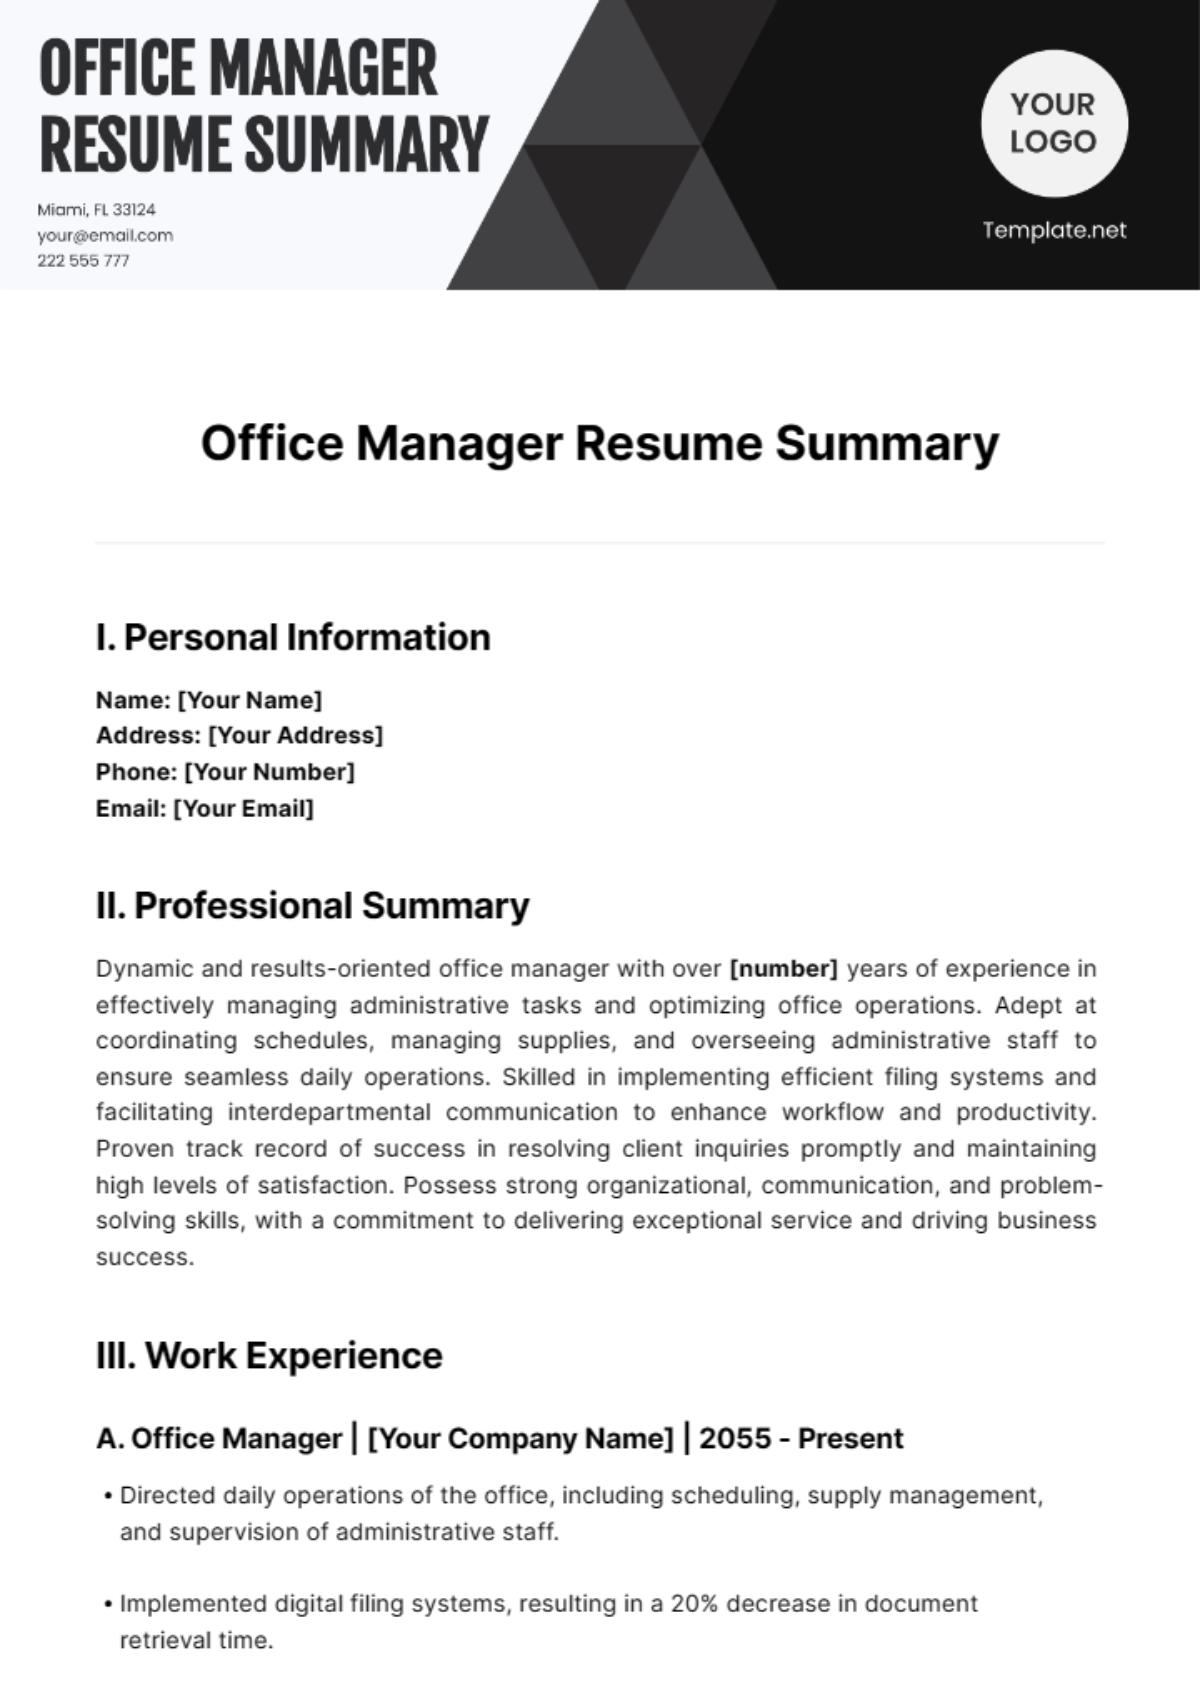 Office Manager Resume Summary Template